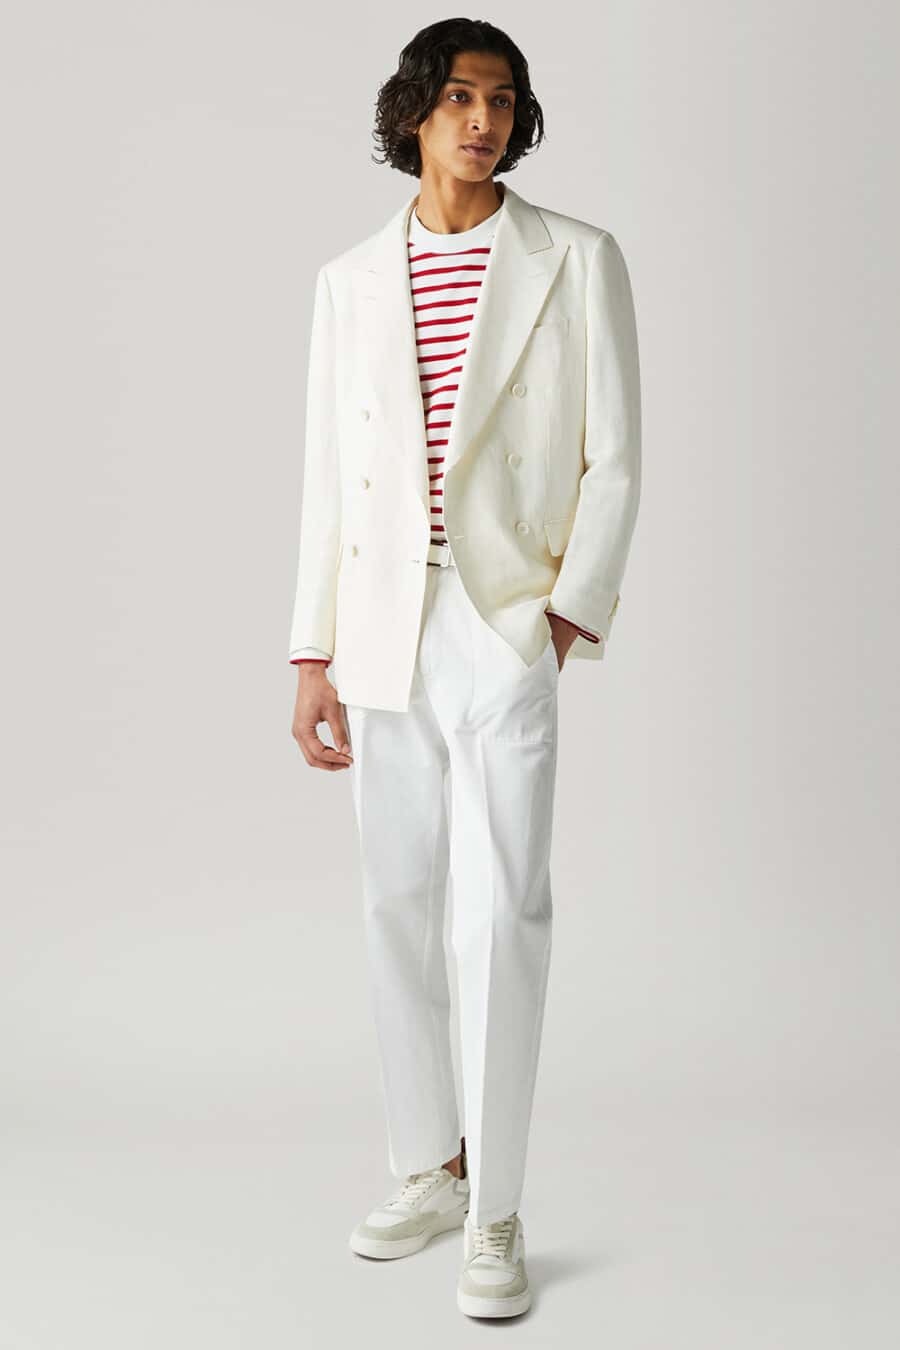 Men's white pants, white & red stripe top, cream double-breasted blazer and white sneakers outfit